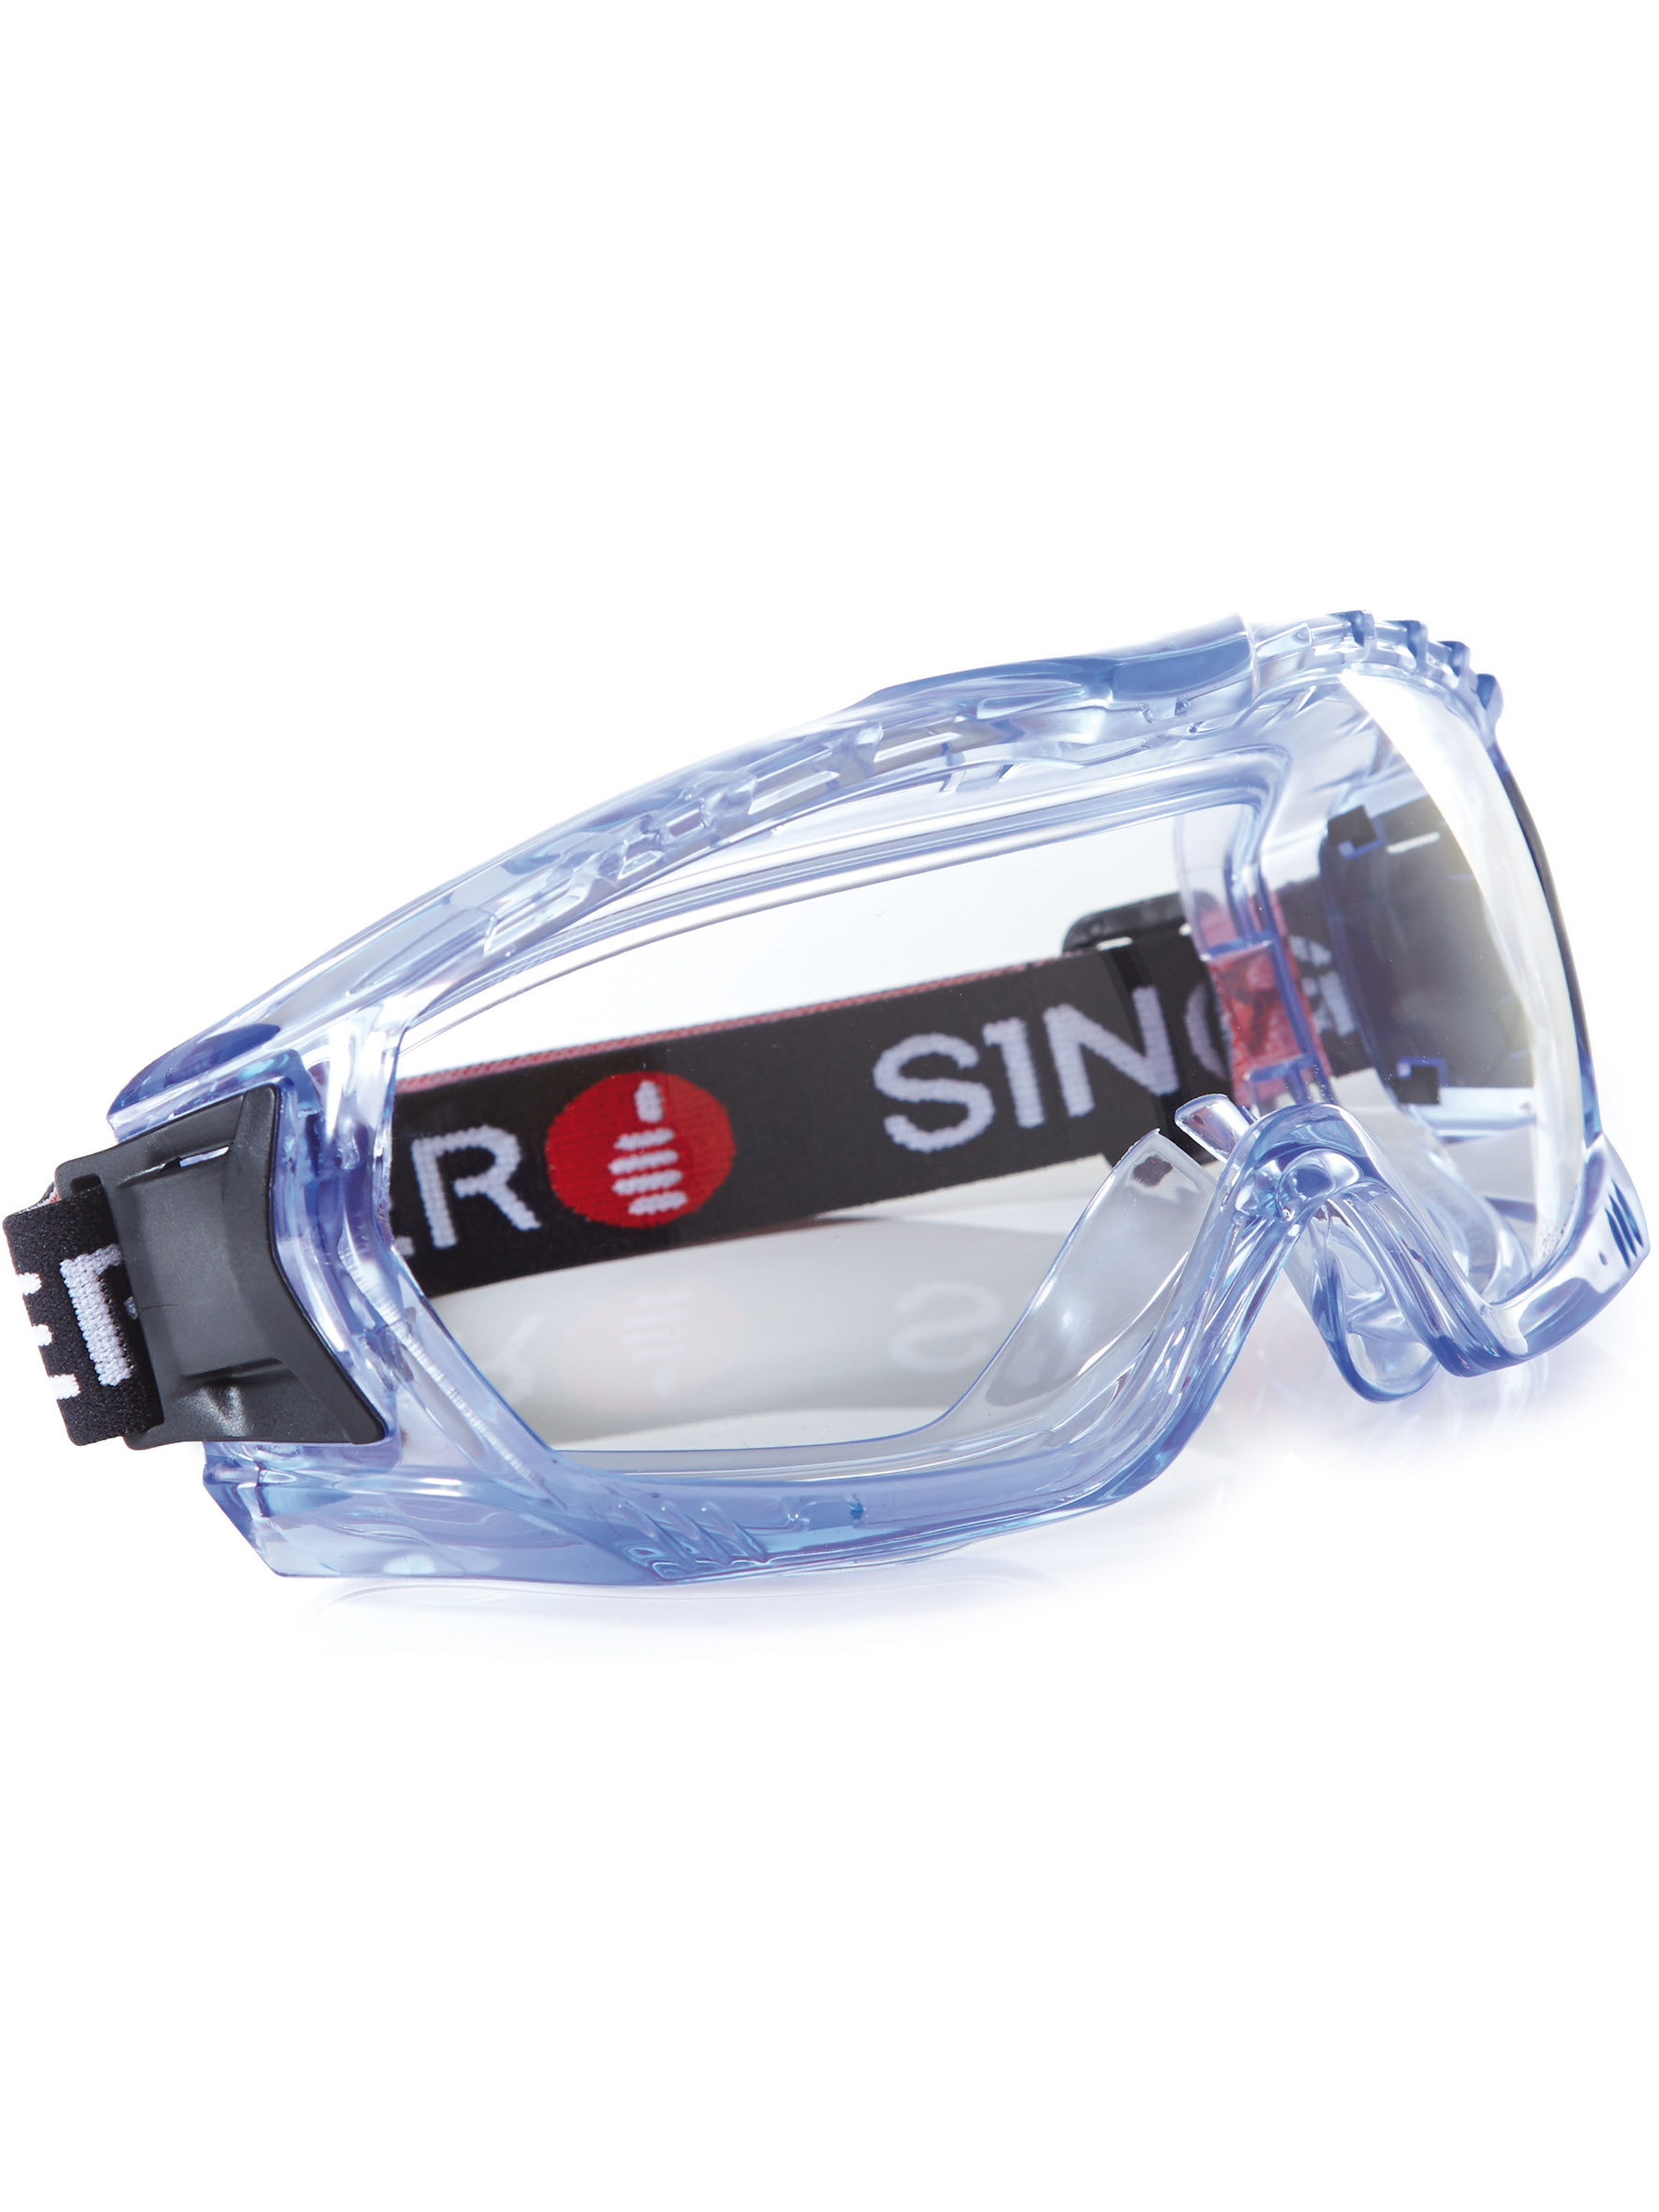 Item Safety goggle. Clear lens. Enhanced peripheral vision.